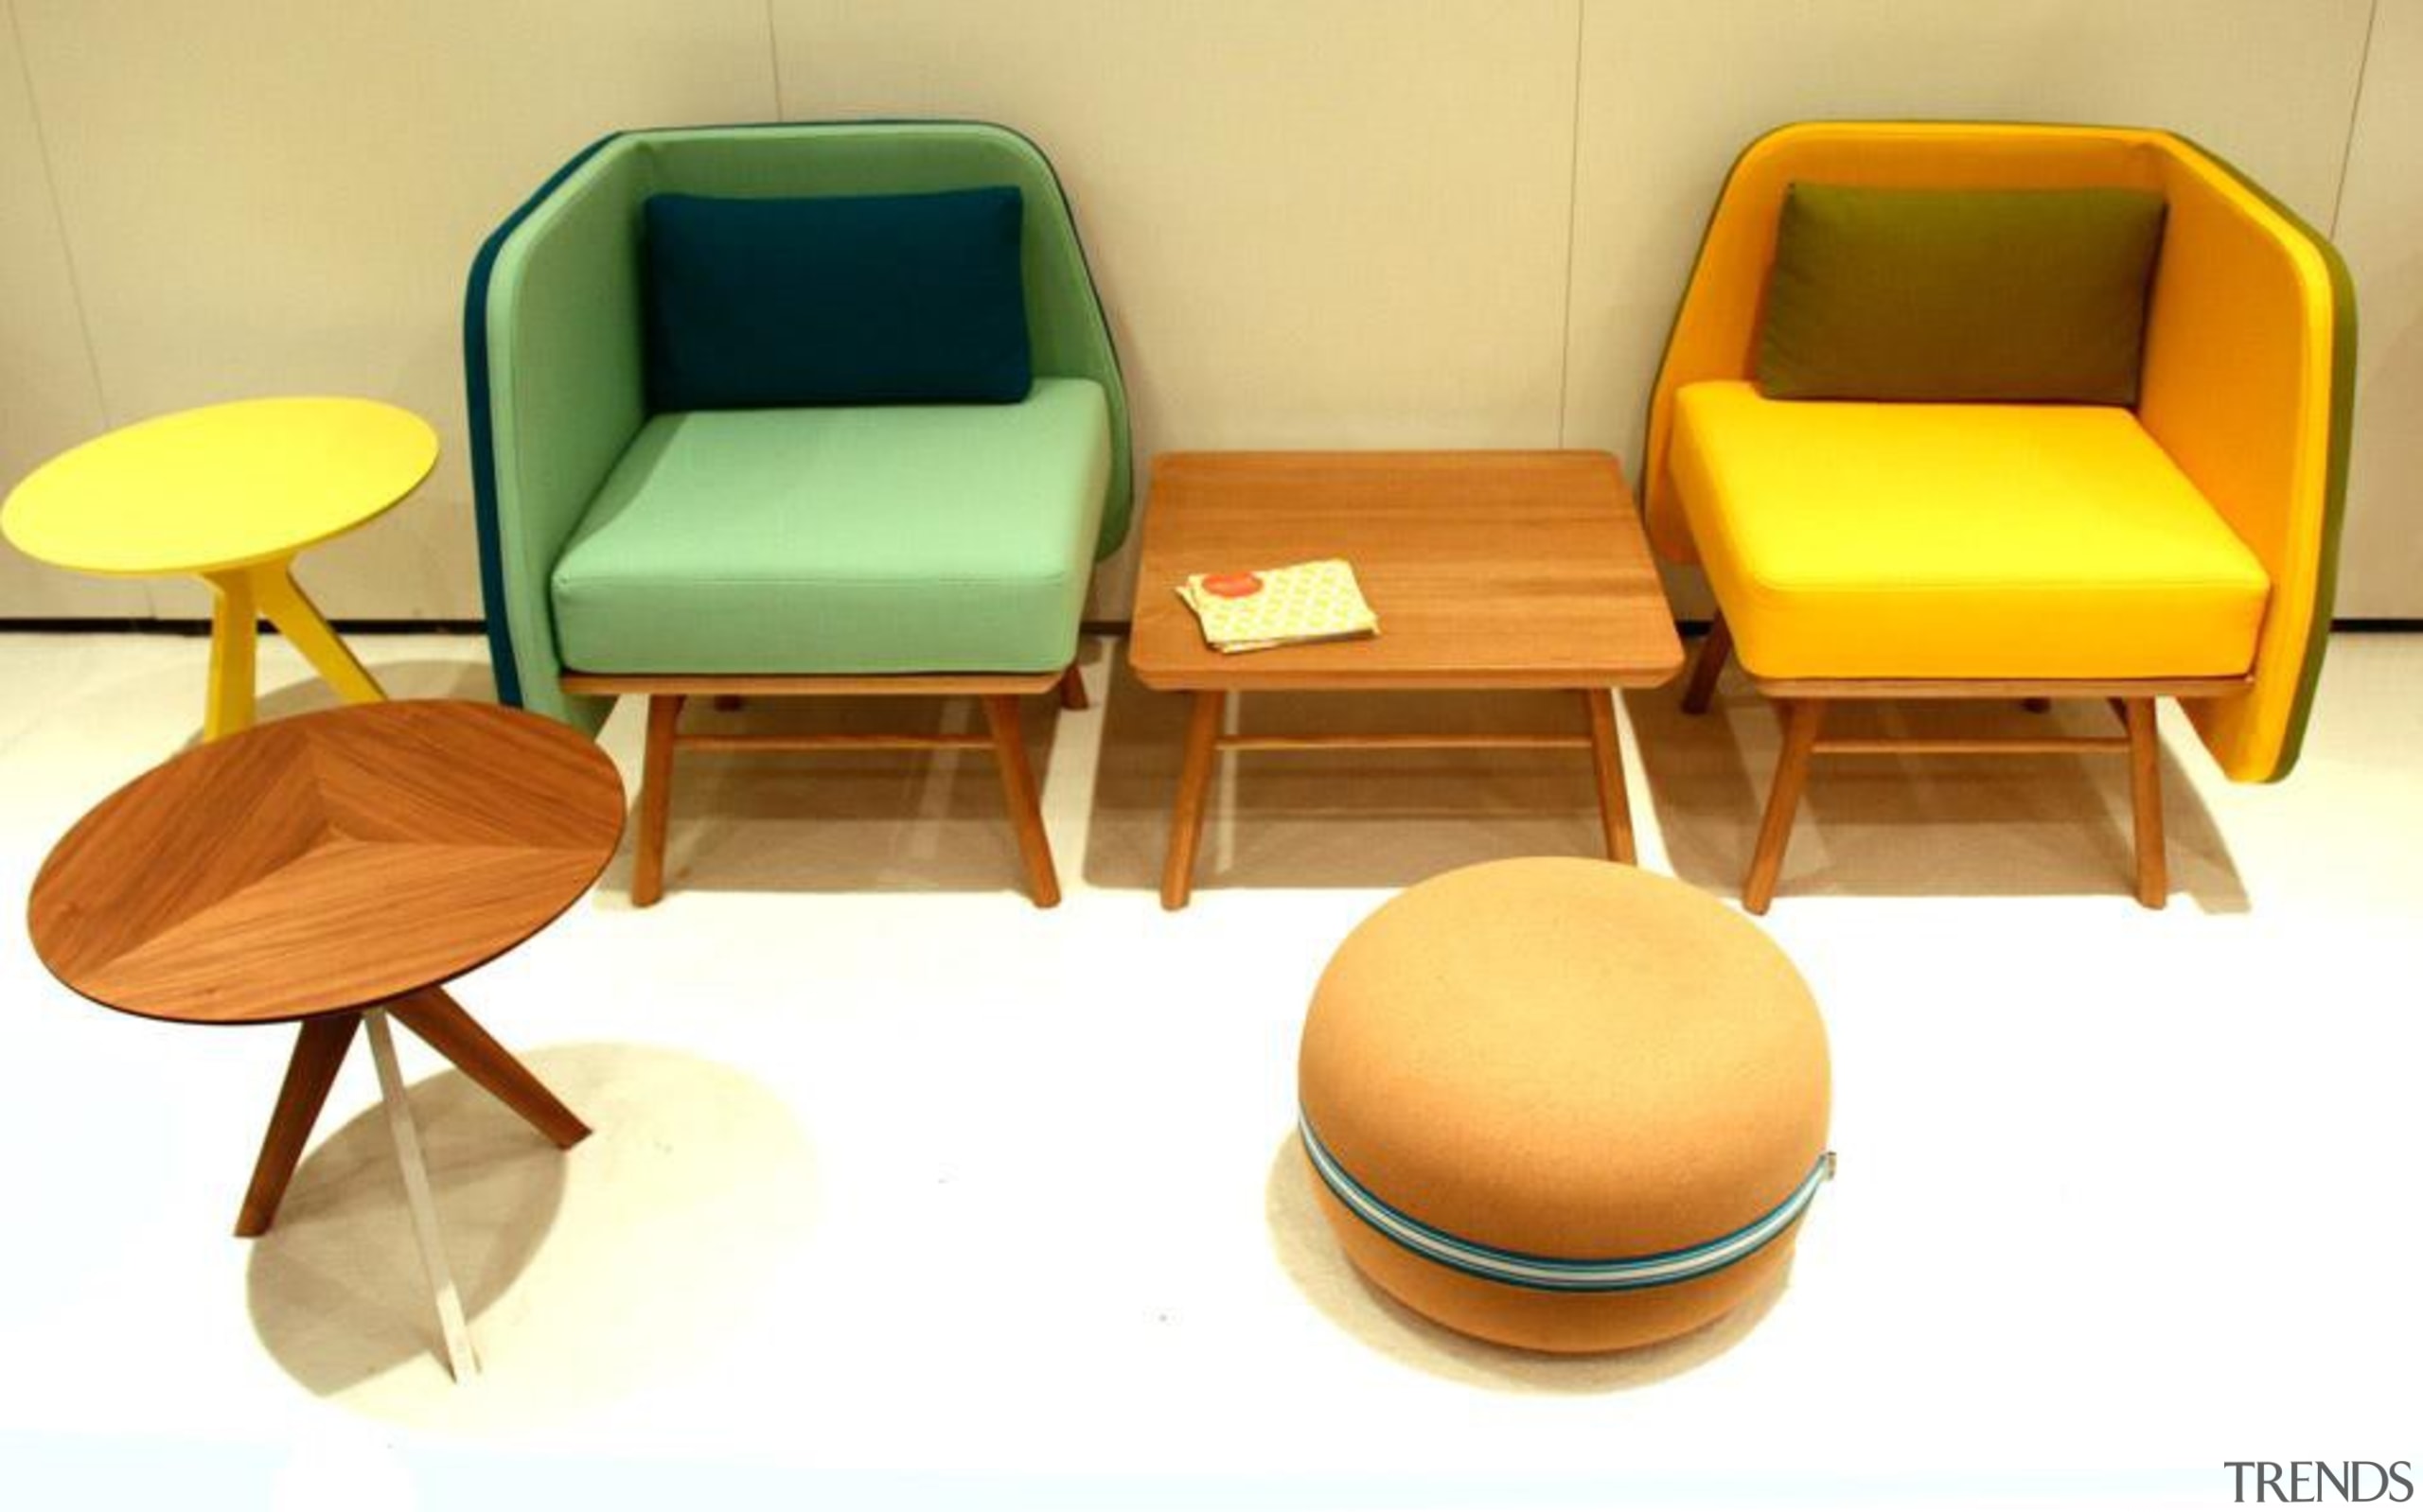 Bi Silla is a new collection from Portuguese chair, design, furniture, product, table, yellow, orange, white